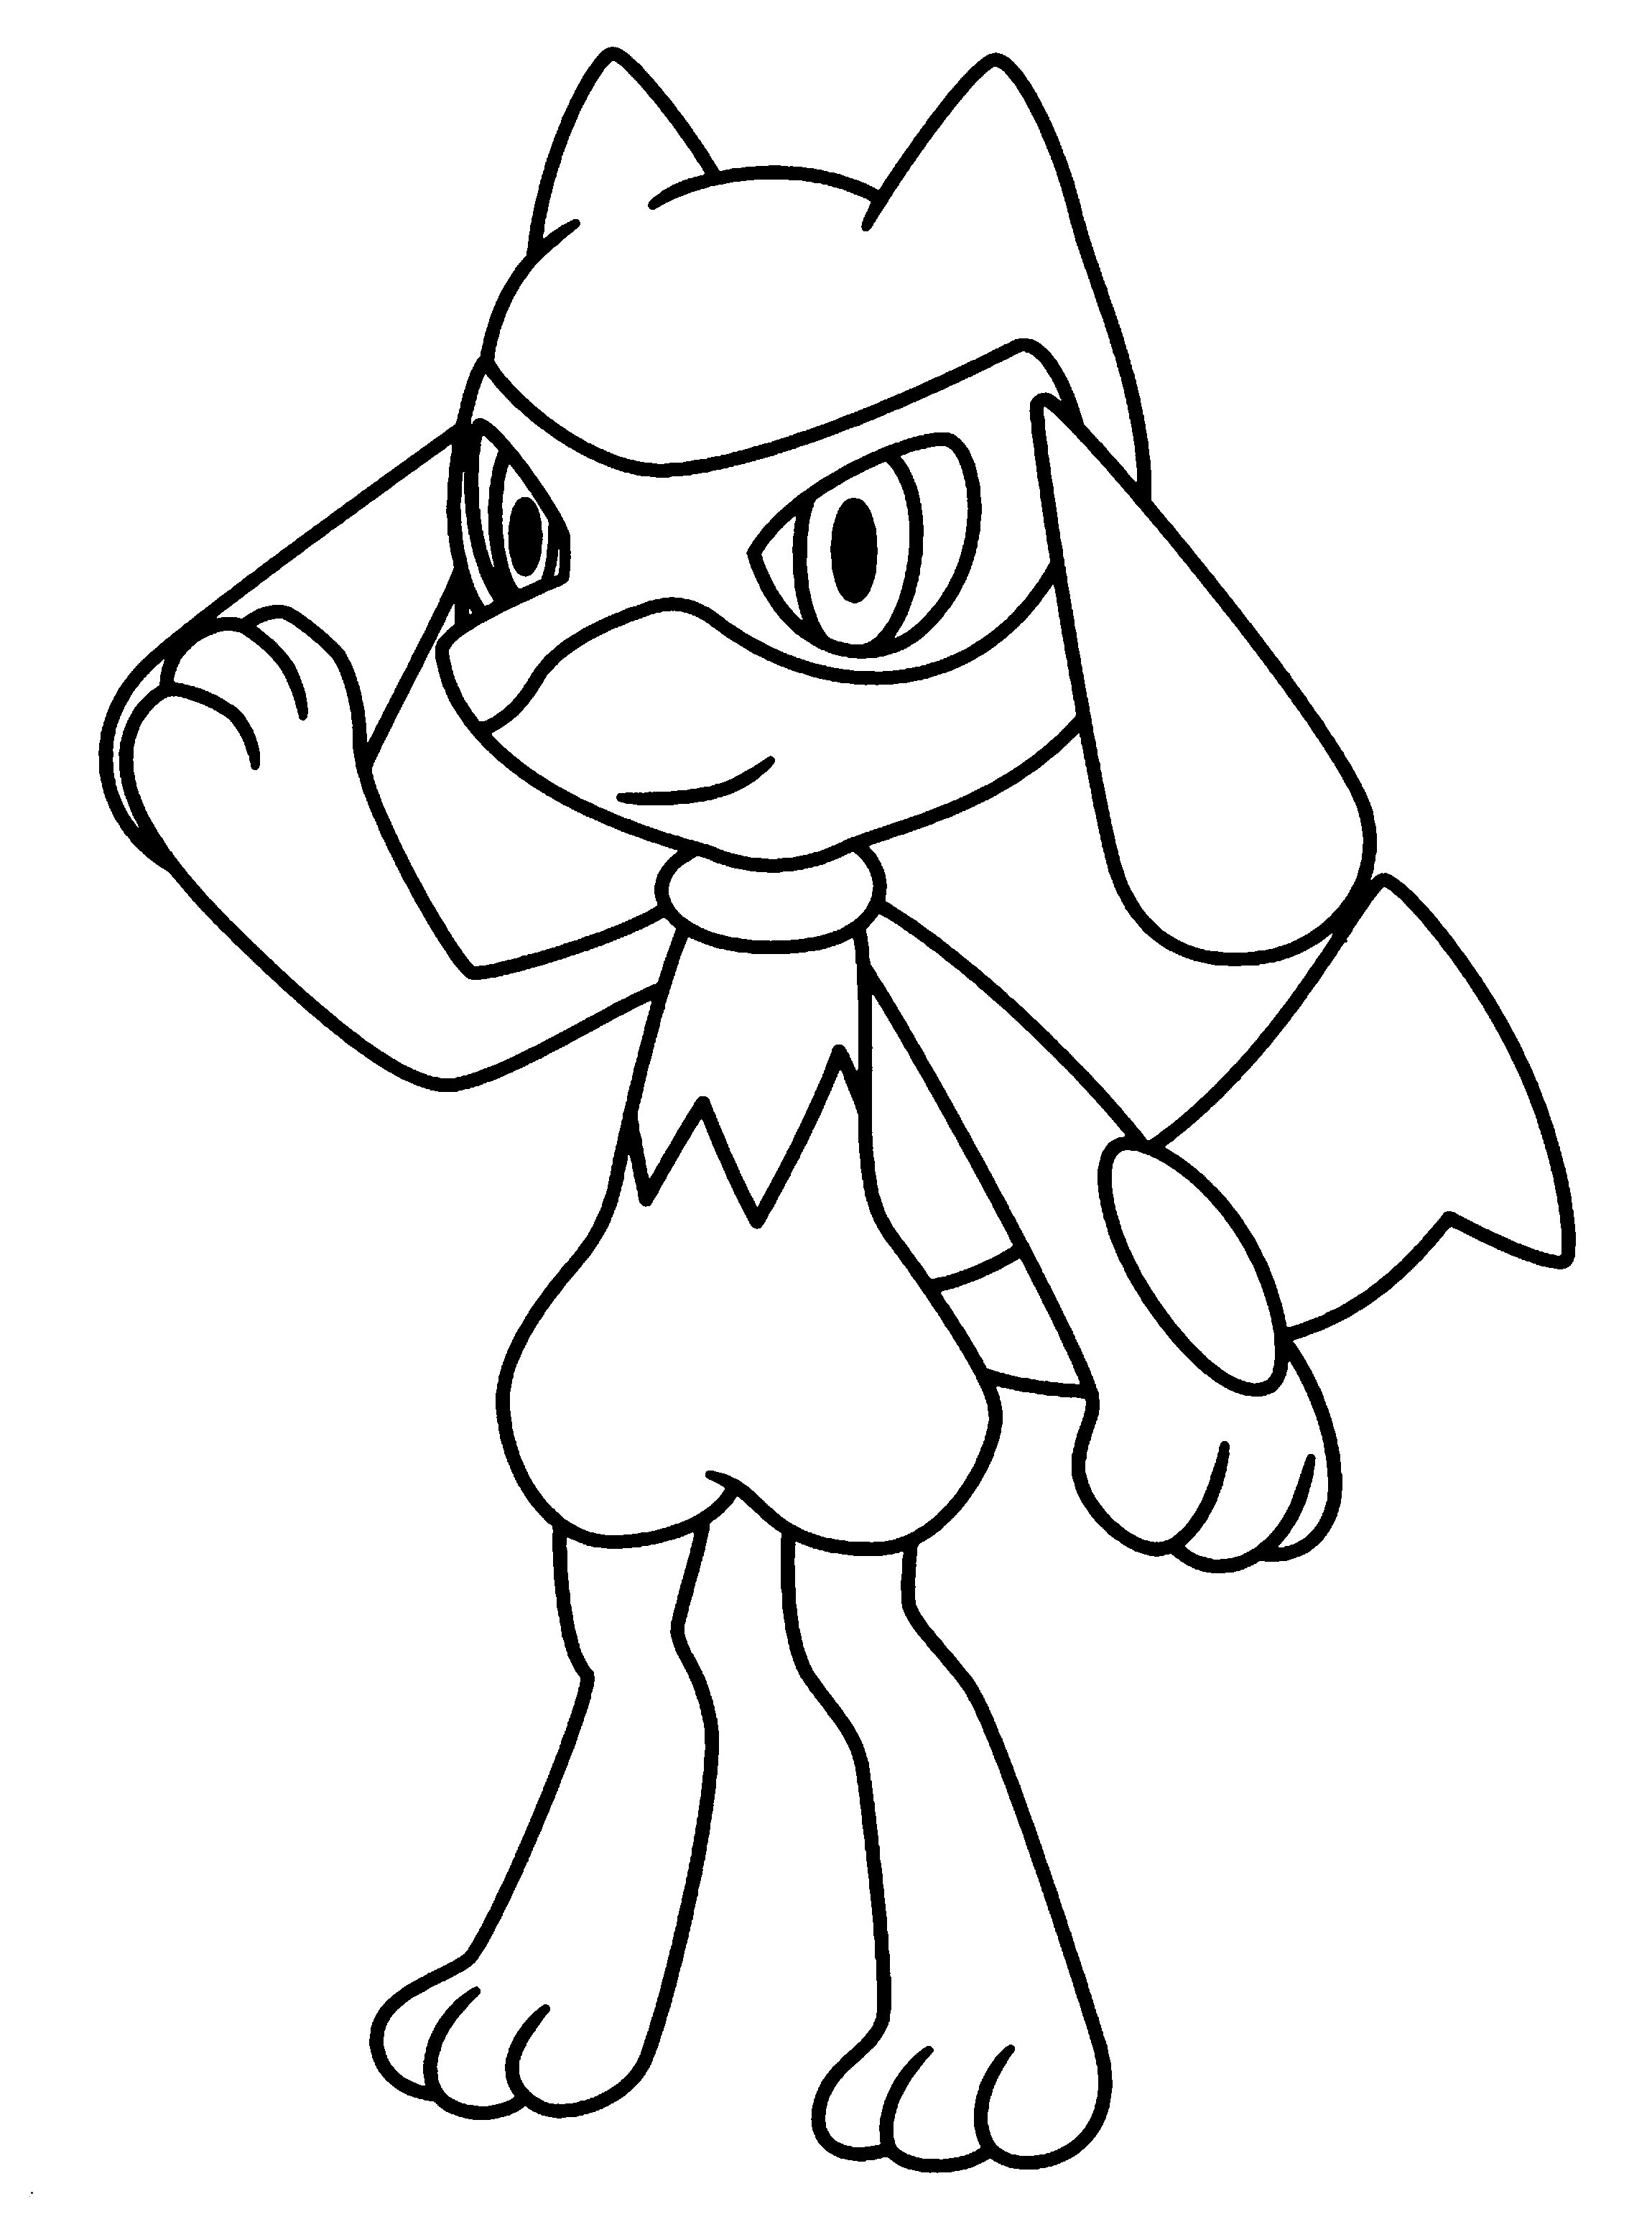 Pokemon Coloring Pages Mega Lucario Coloring Pages Mega Evolved